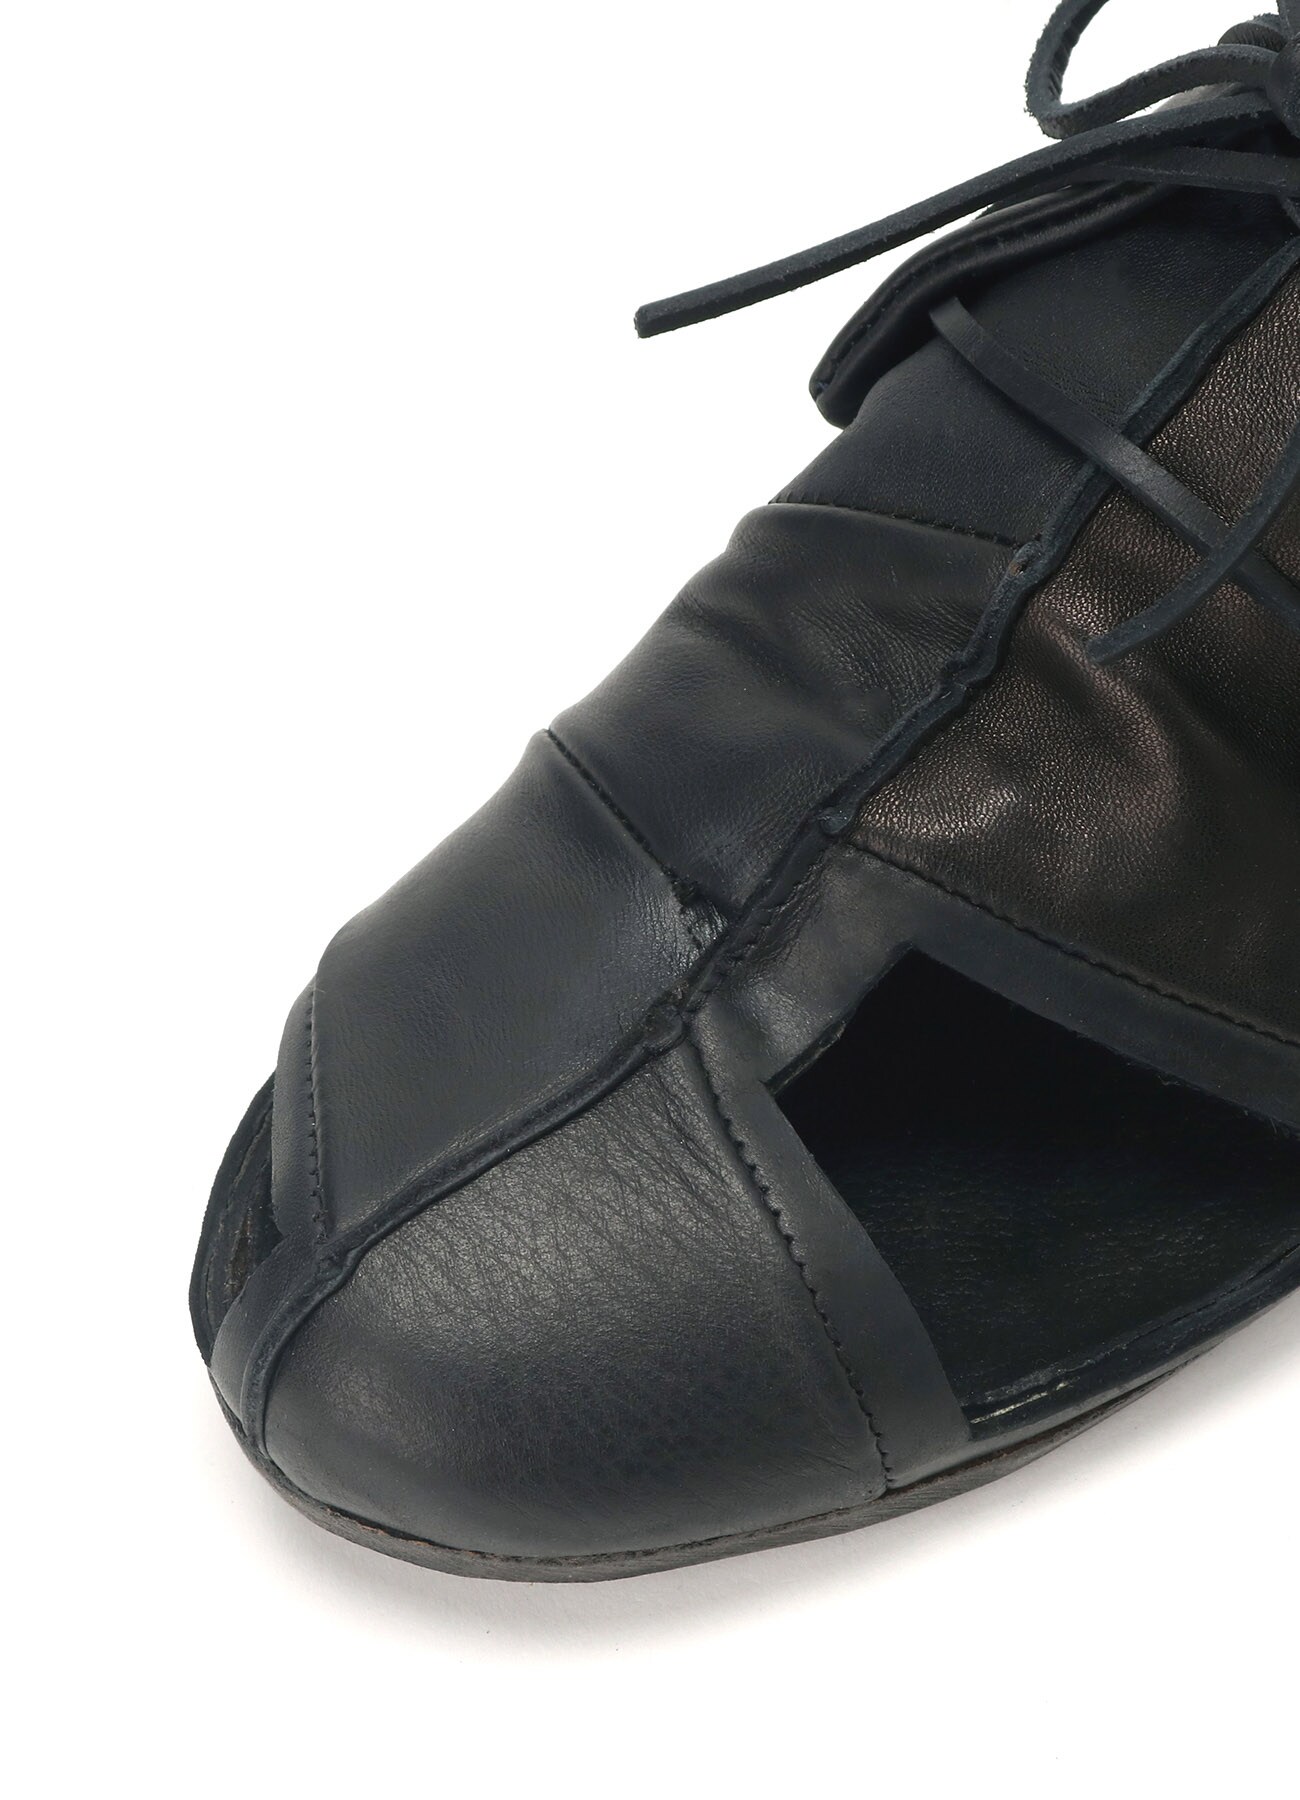 BLACK GOAT LEATHER PATCHWORK SHOES